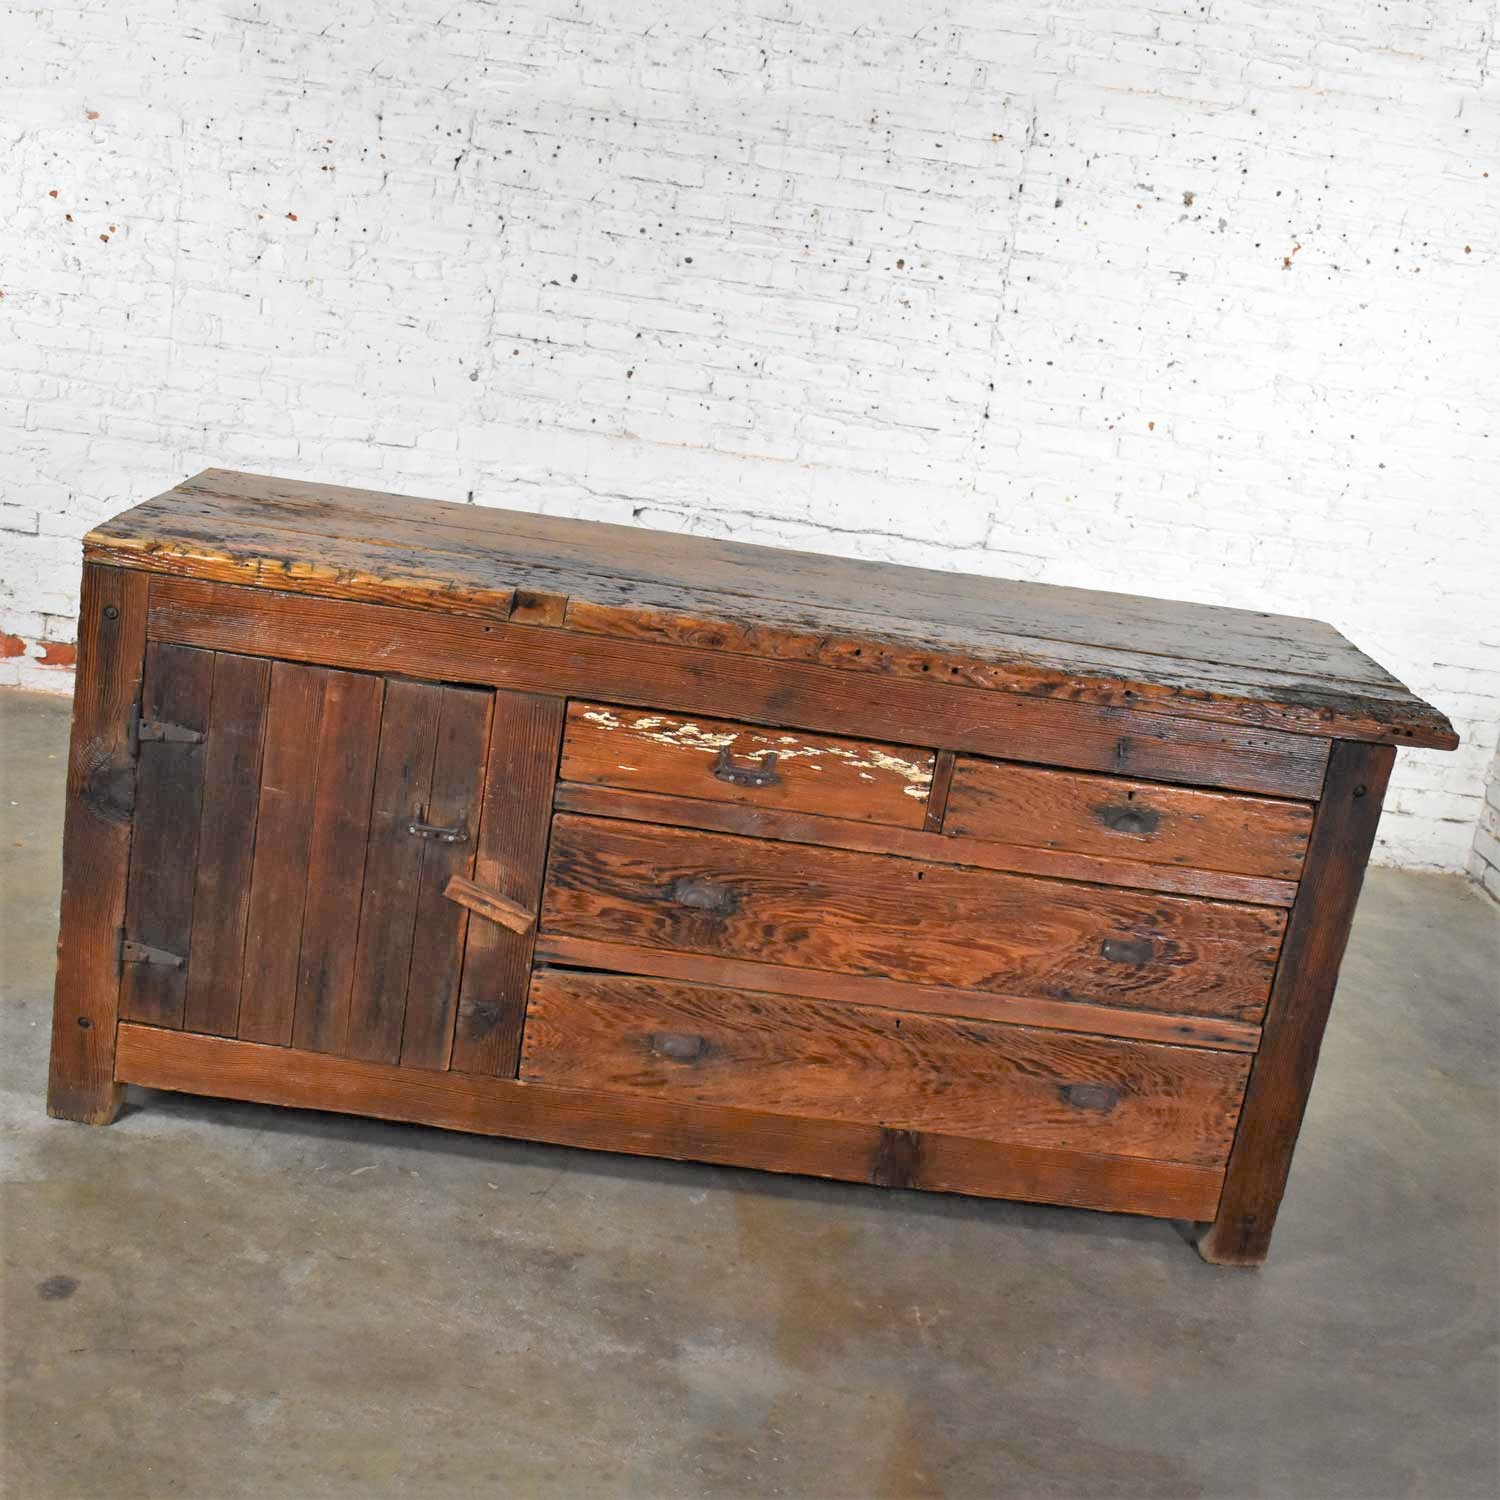 Antique Rustic Primitive Pine Factory Cabinet or Work Bench with Age Patina